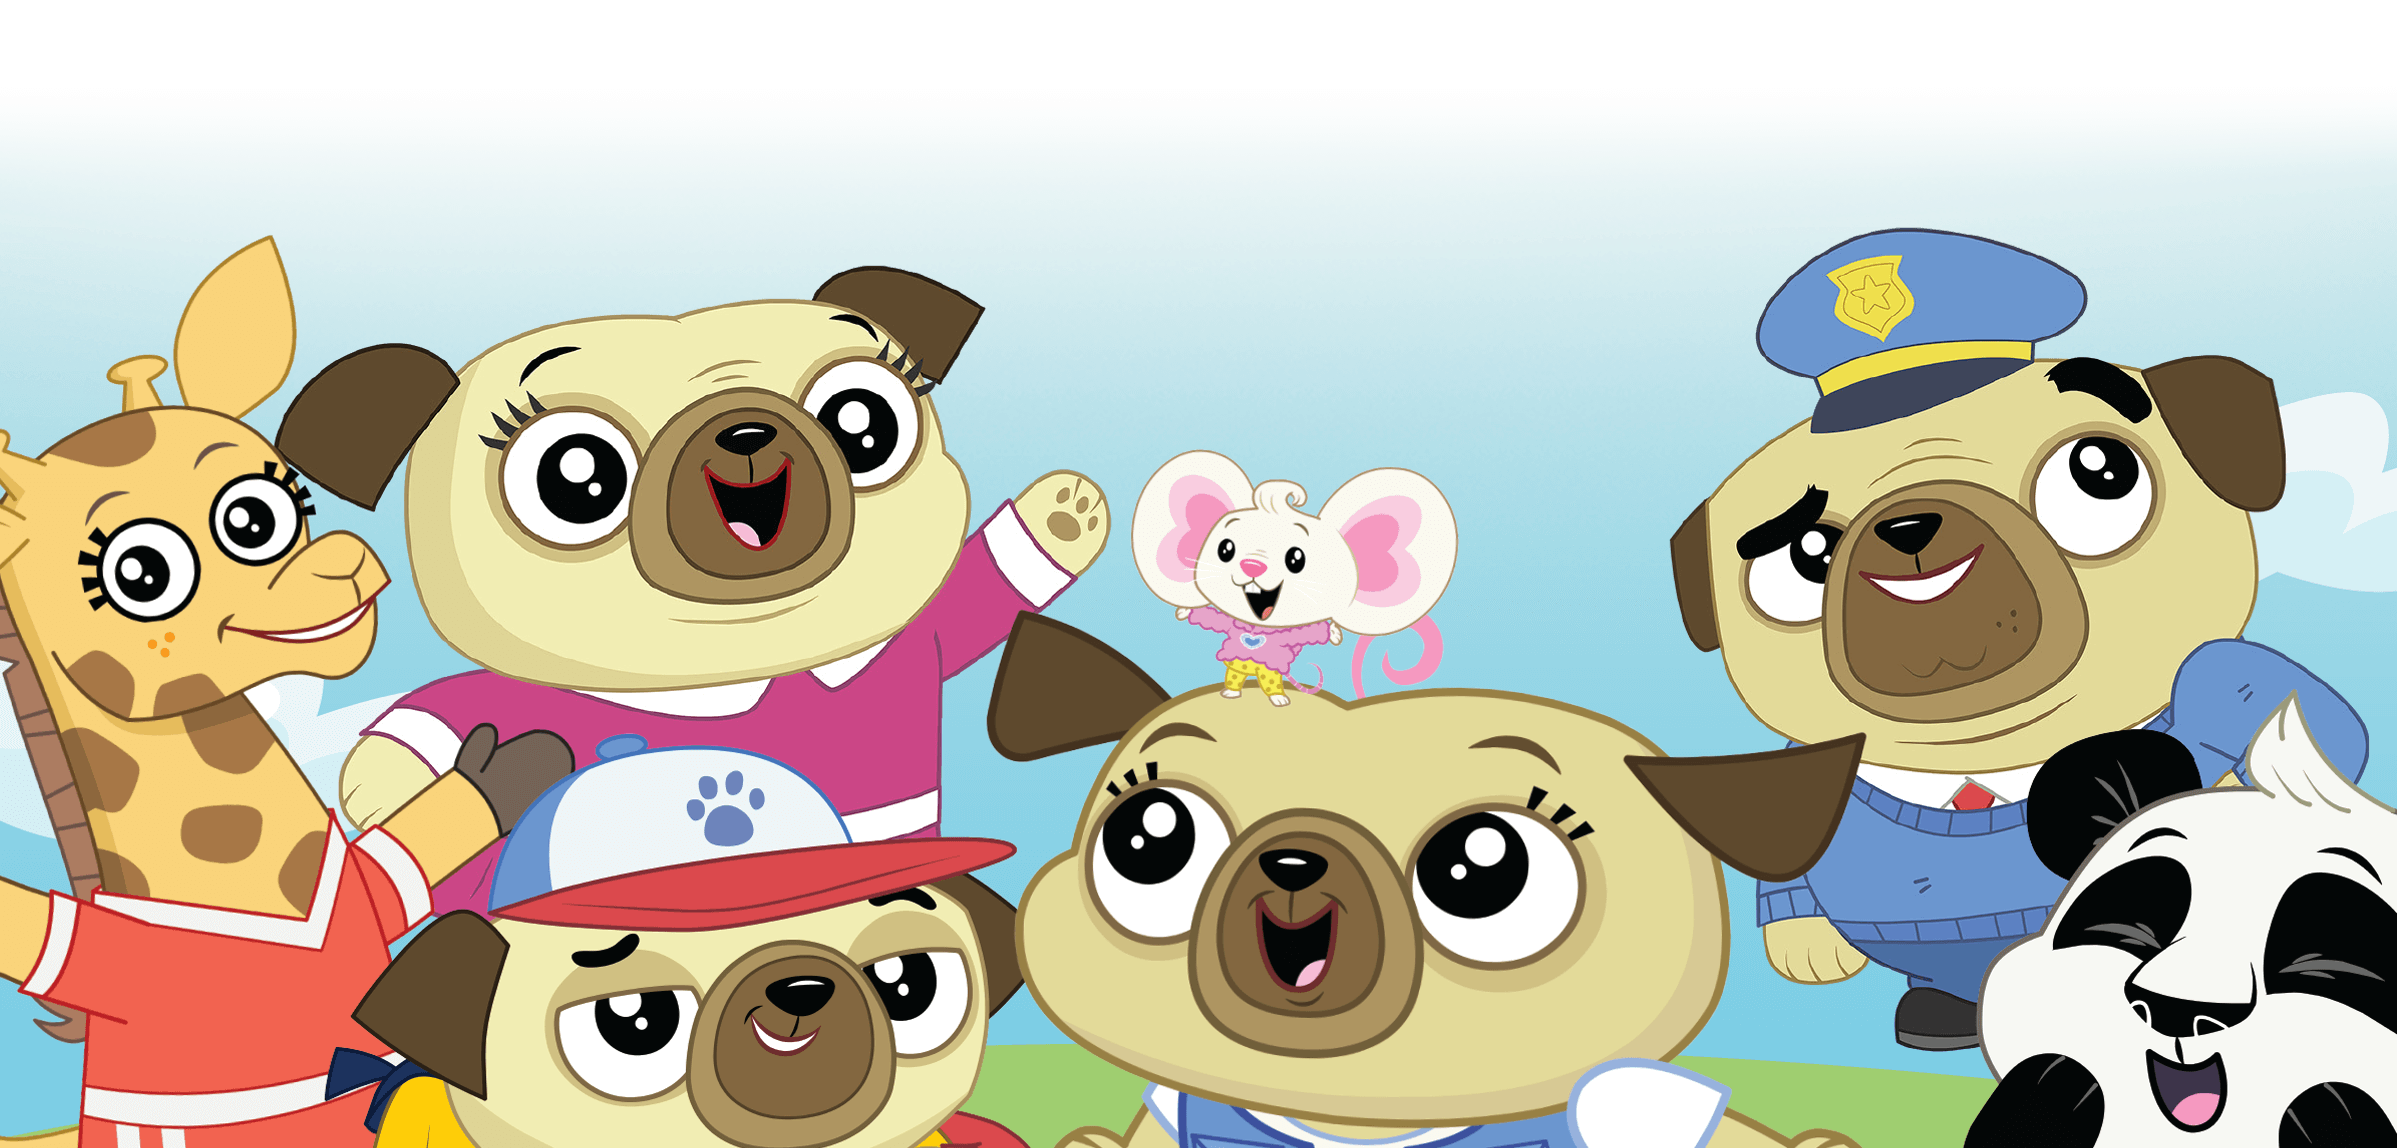 Four pugs, a giraffe, a panda, and a tiny white mouse standing close to one another on a green field with a blue sky in the background.